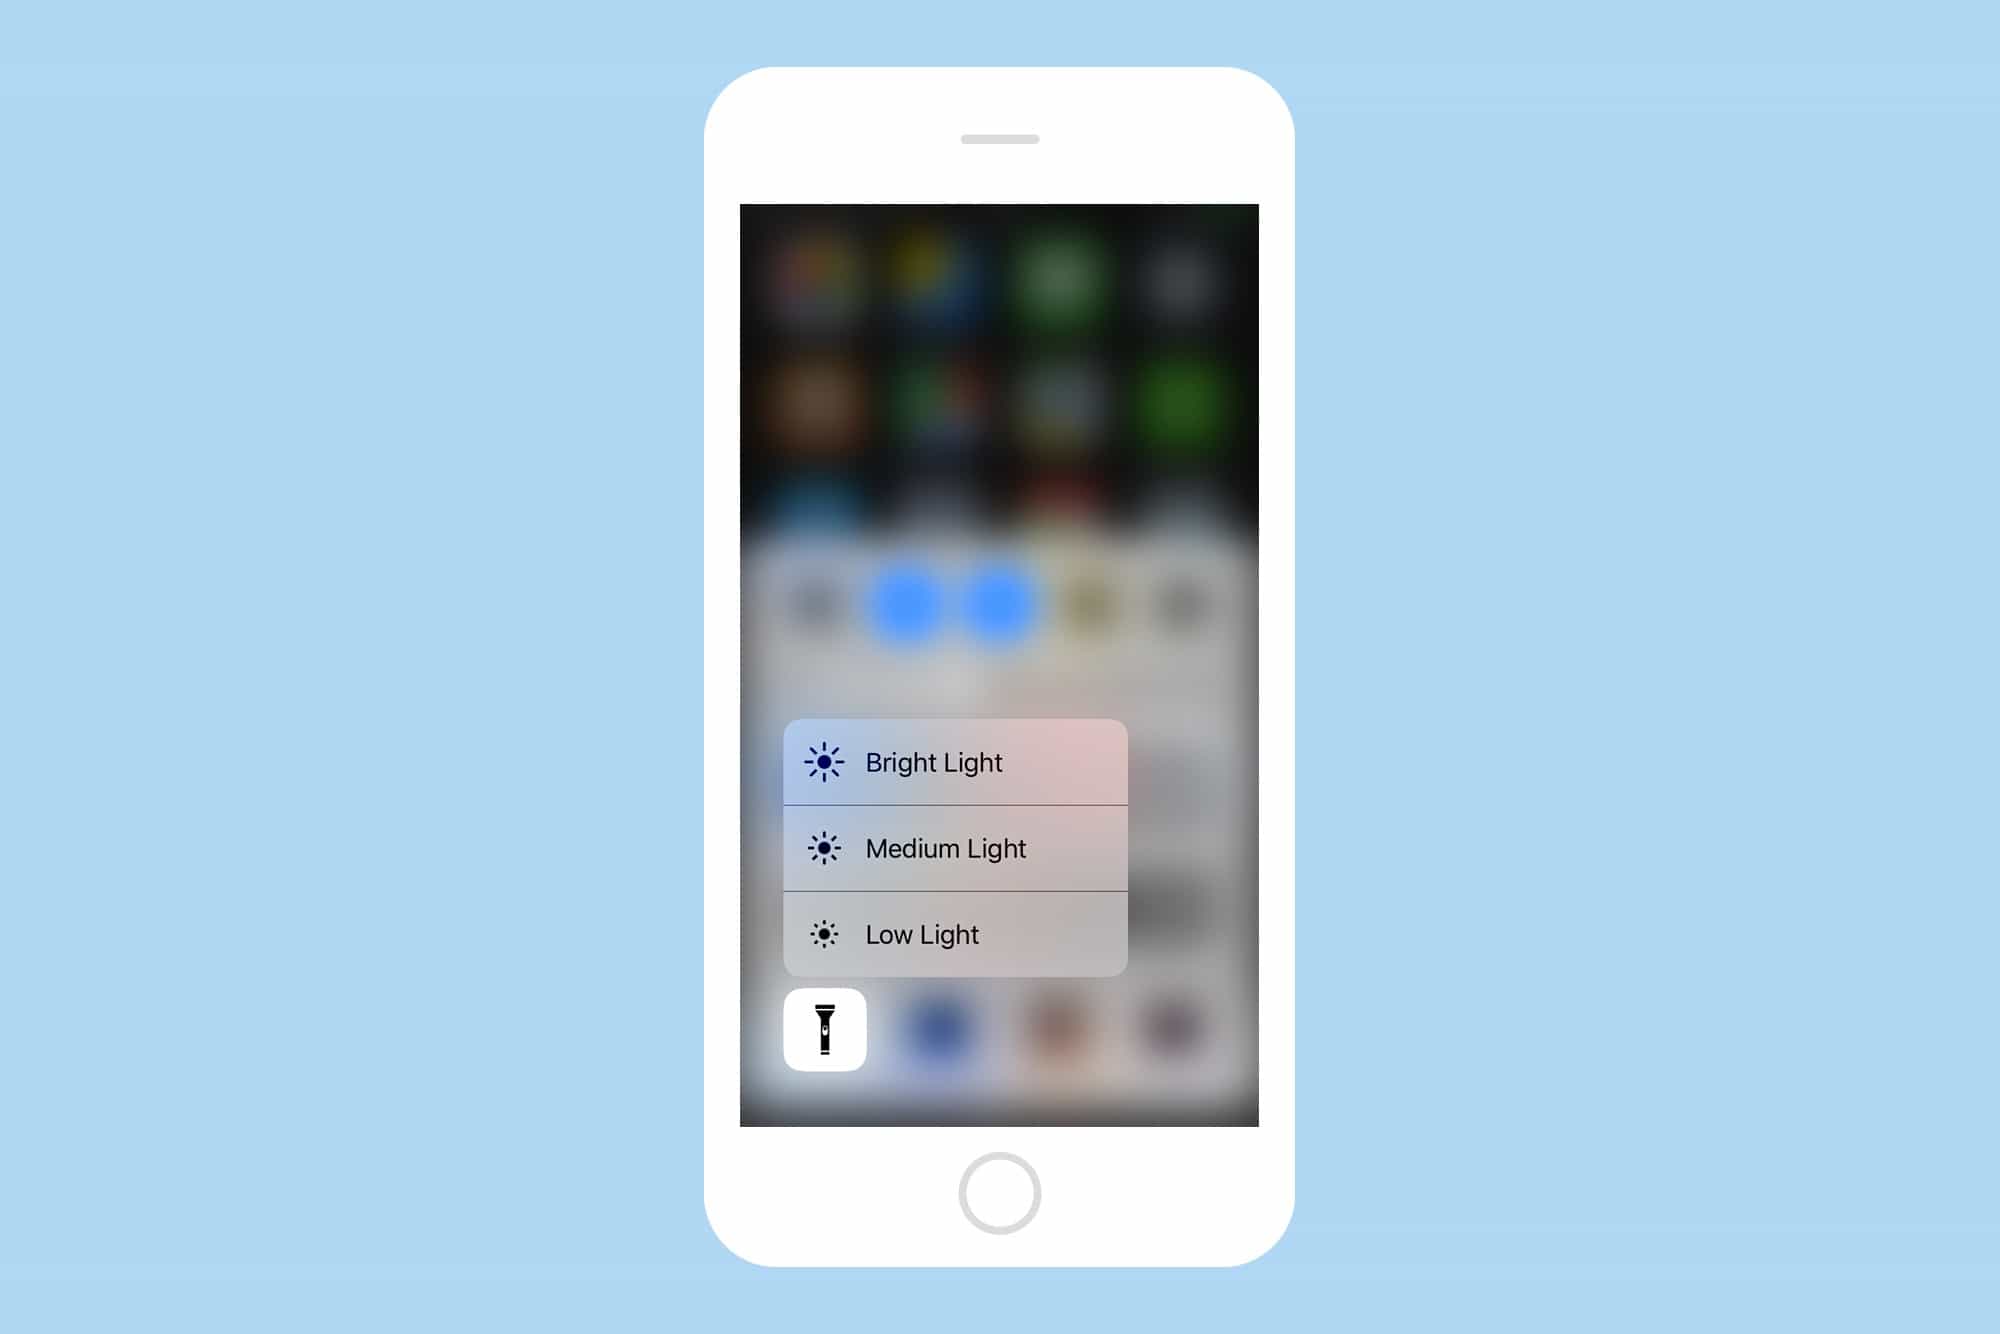 Save battery, or go easy on your eyes, with flashlight brightness controls.